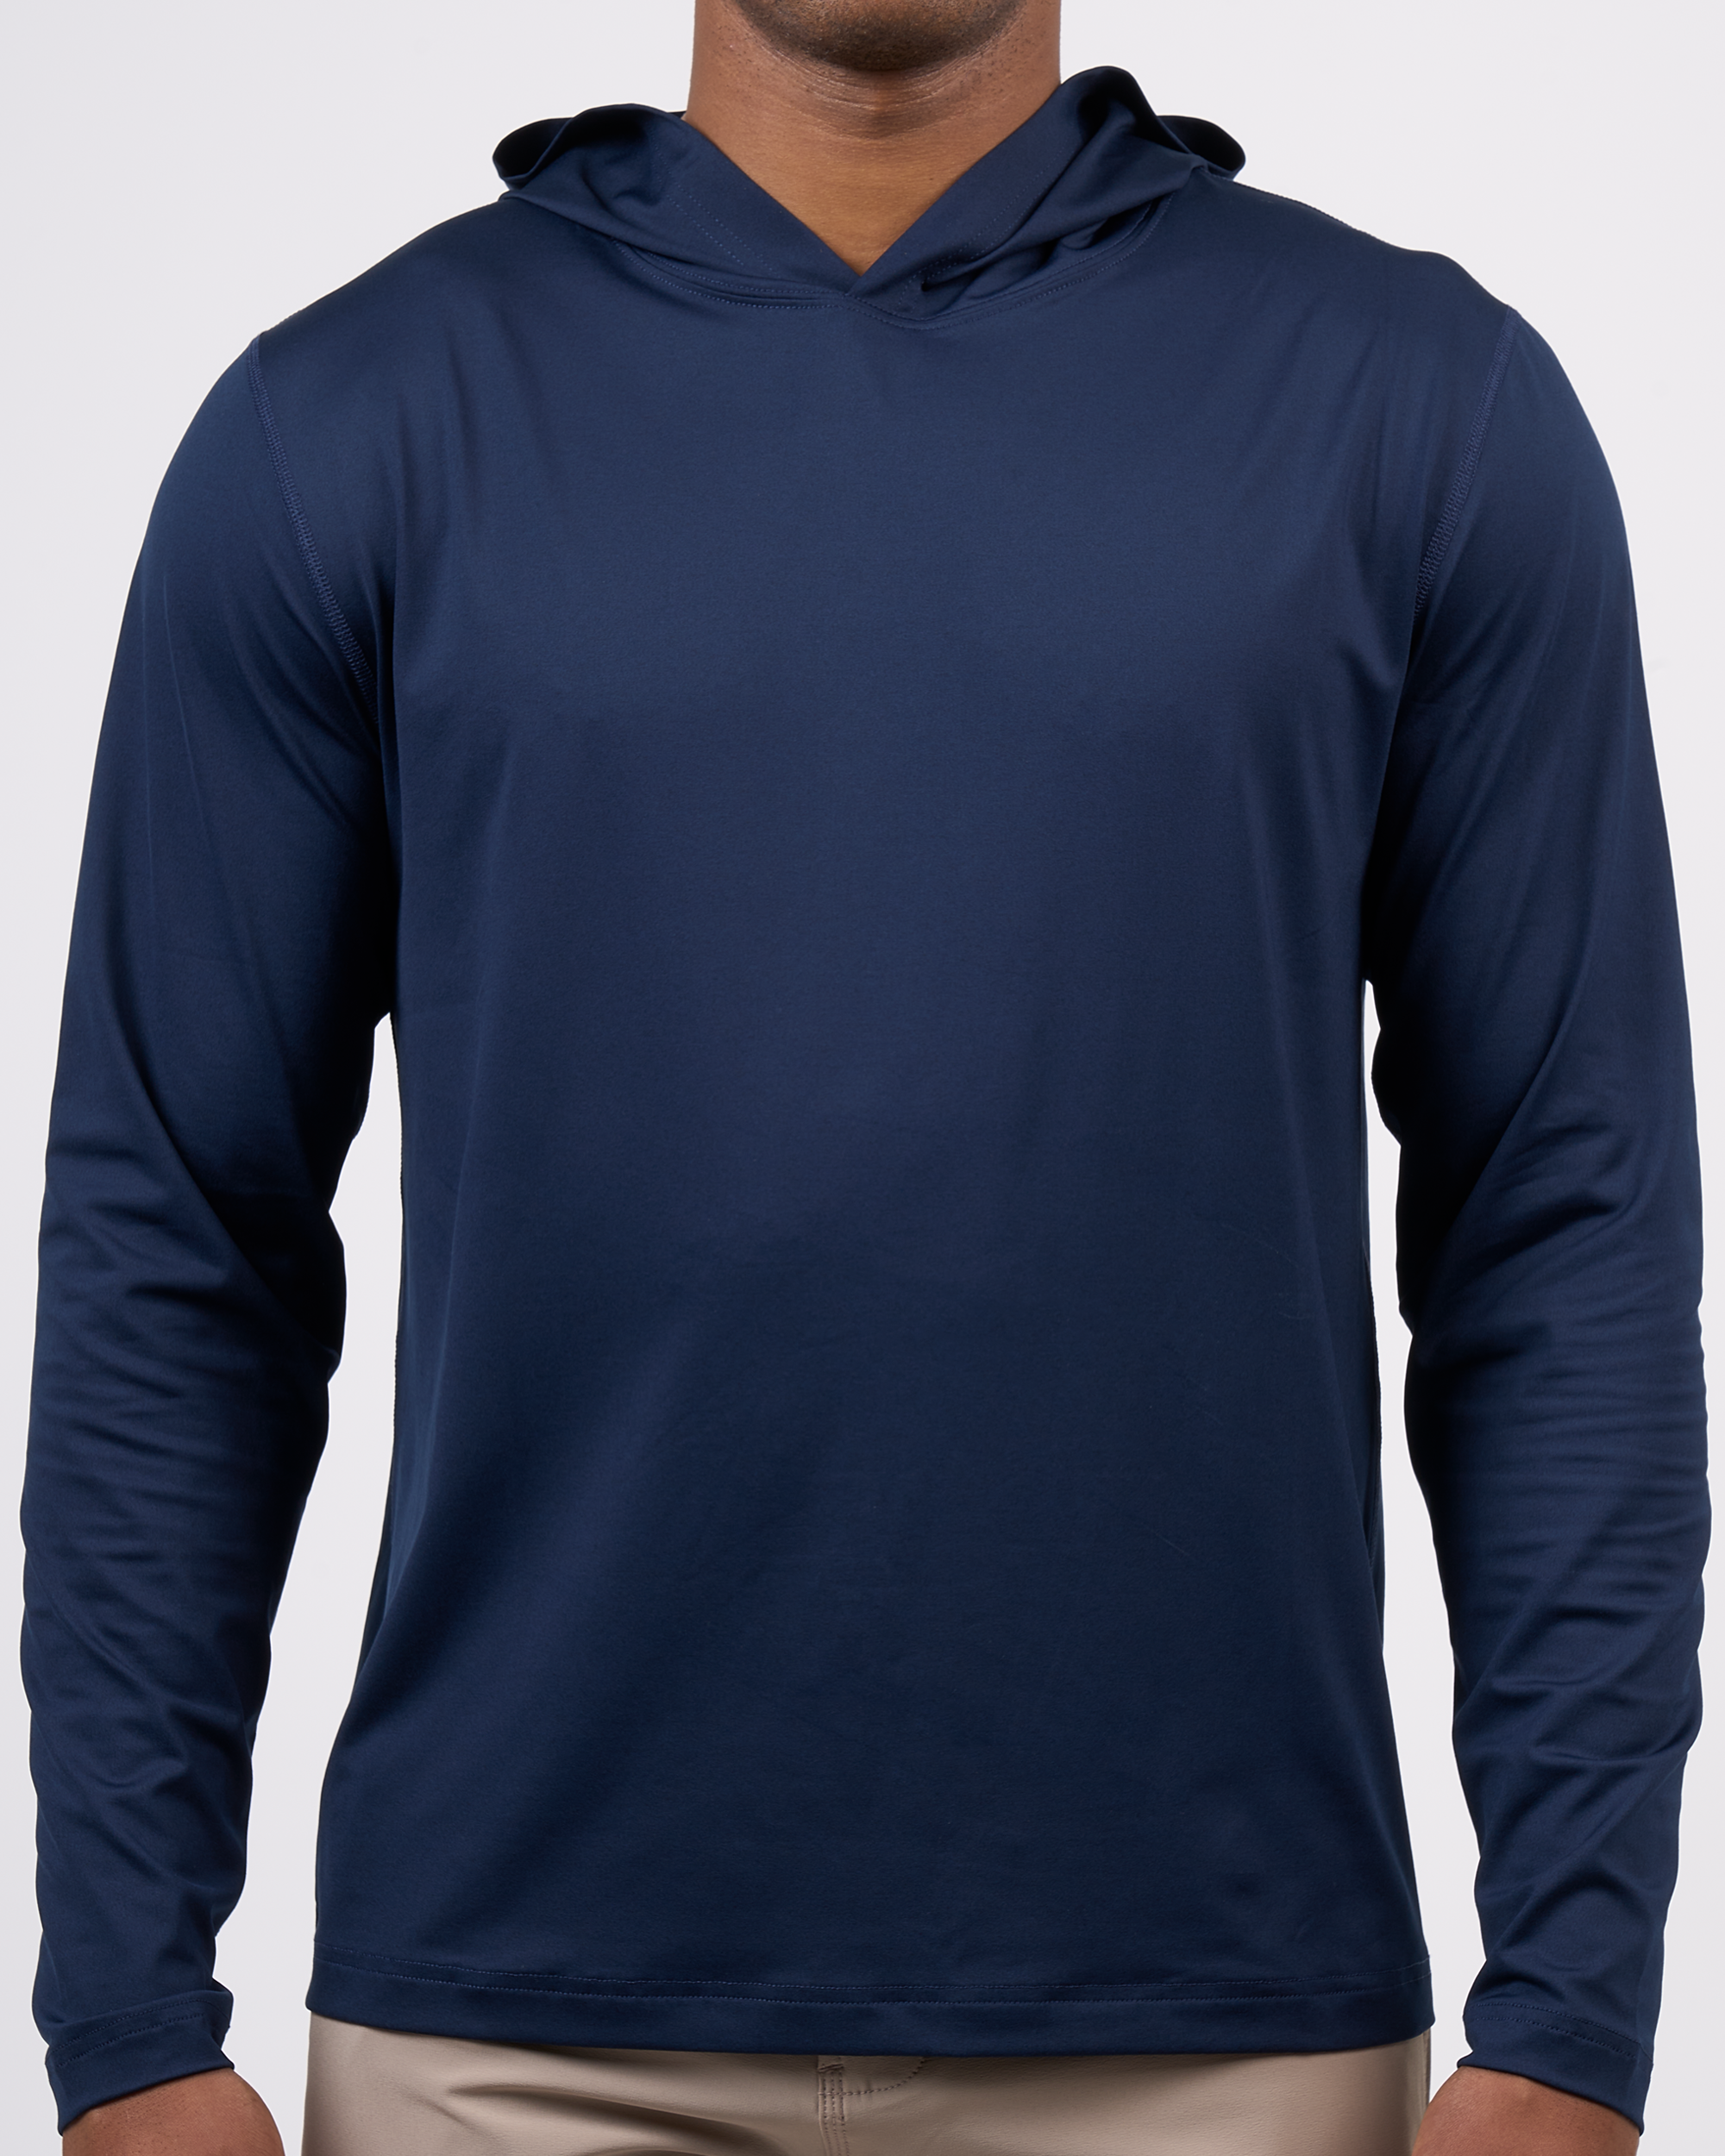 Foreign Rider Co Technical Fabric Navy Long-Sleeve Hooded T-Shirt Chest Detail